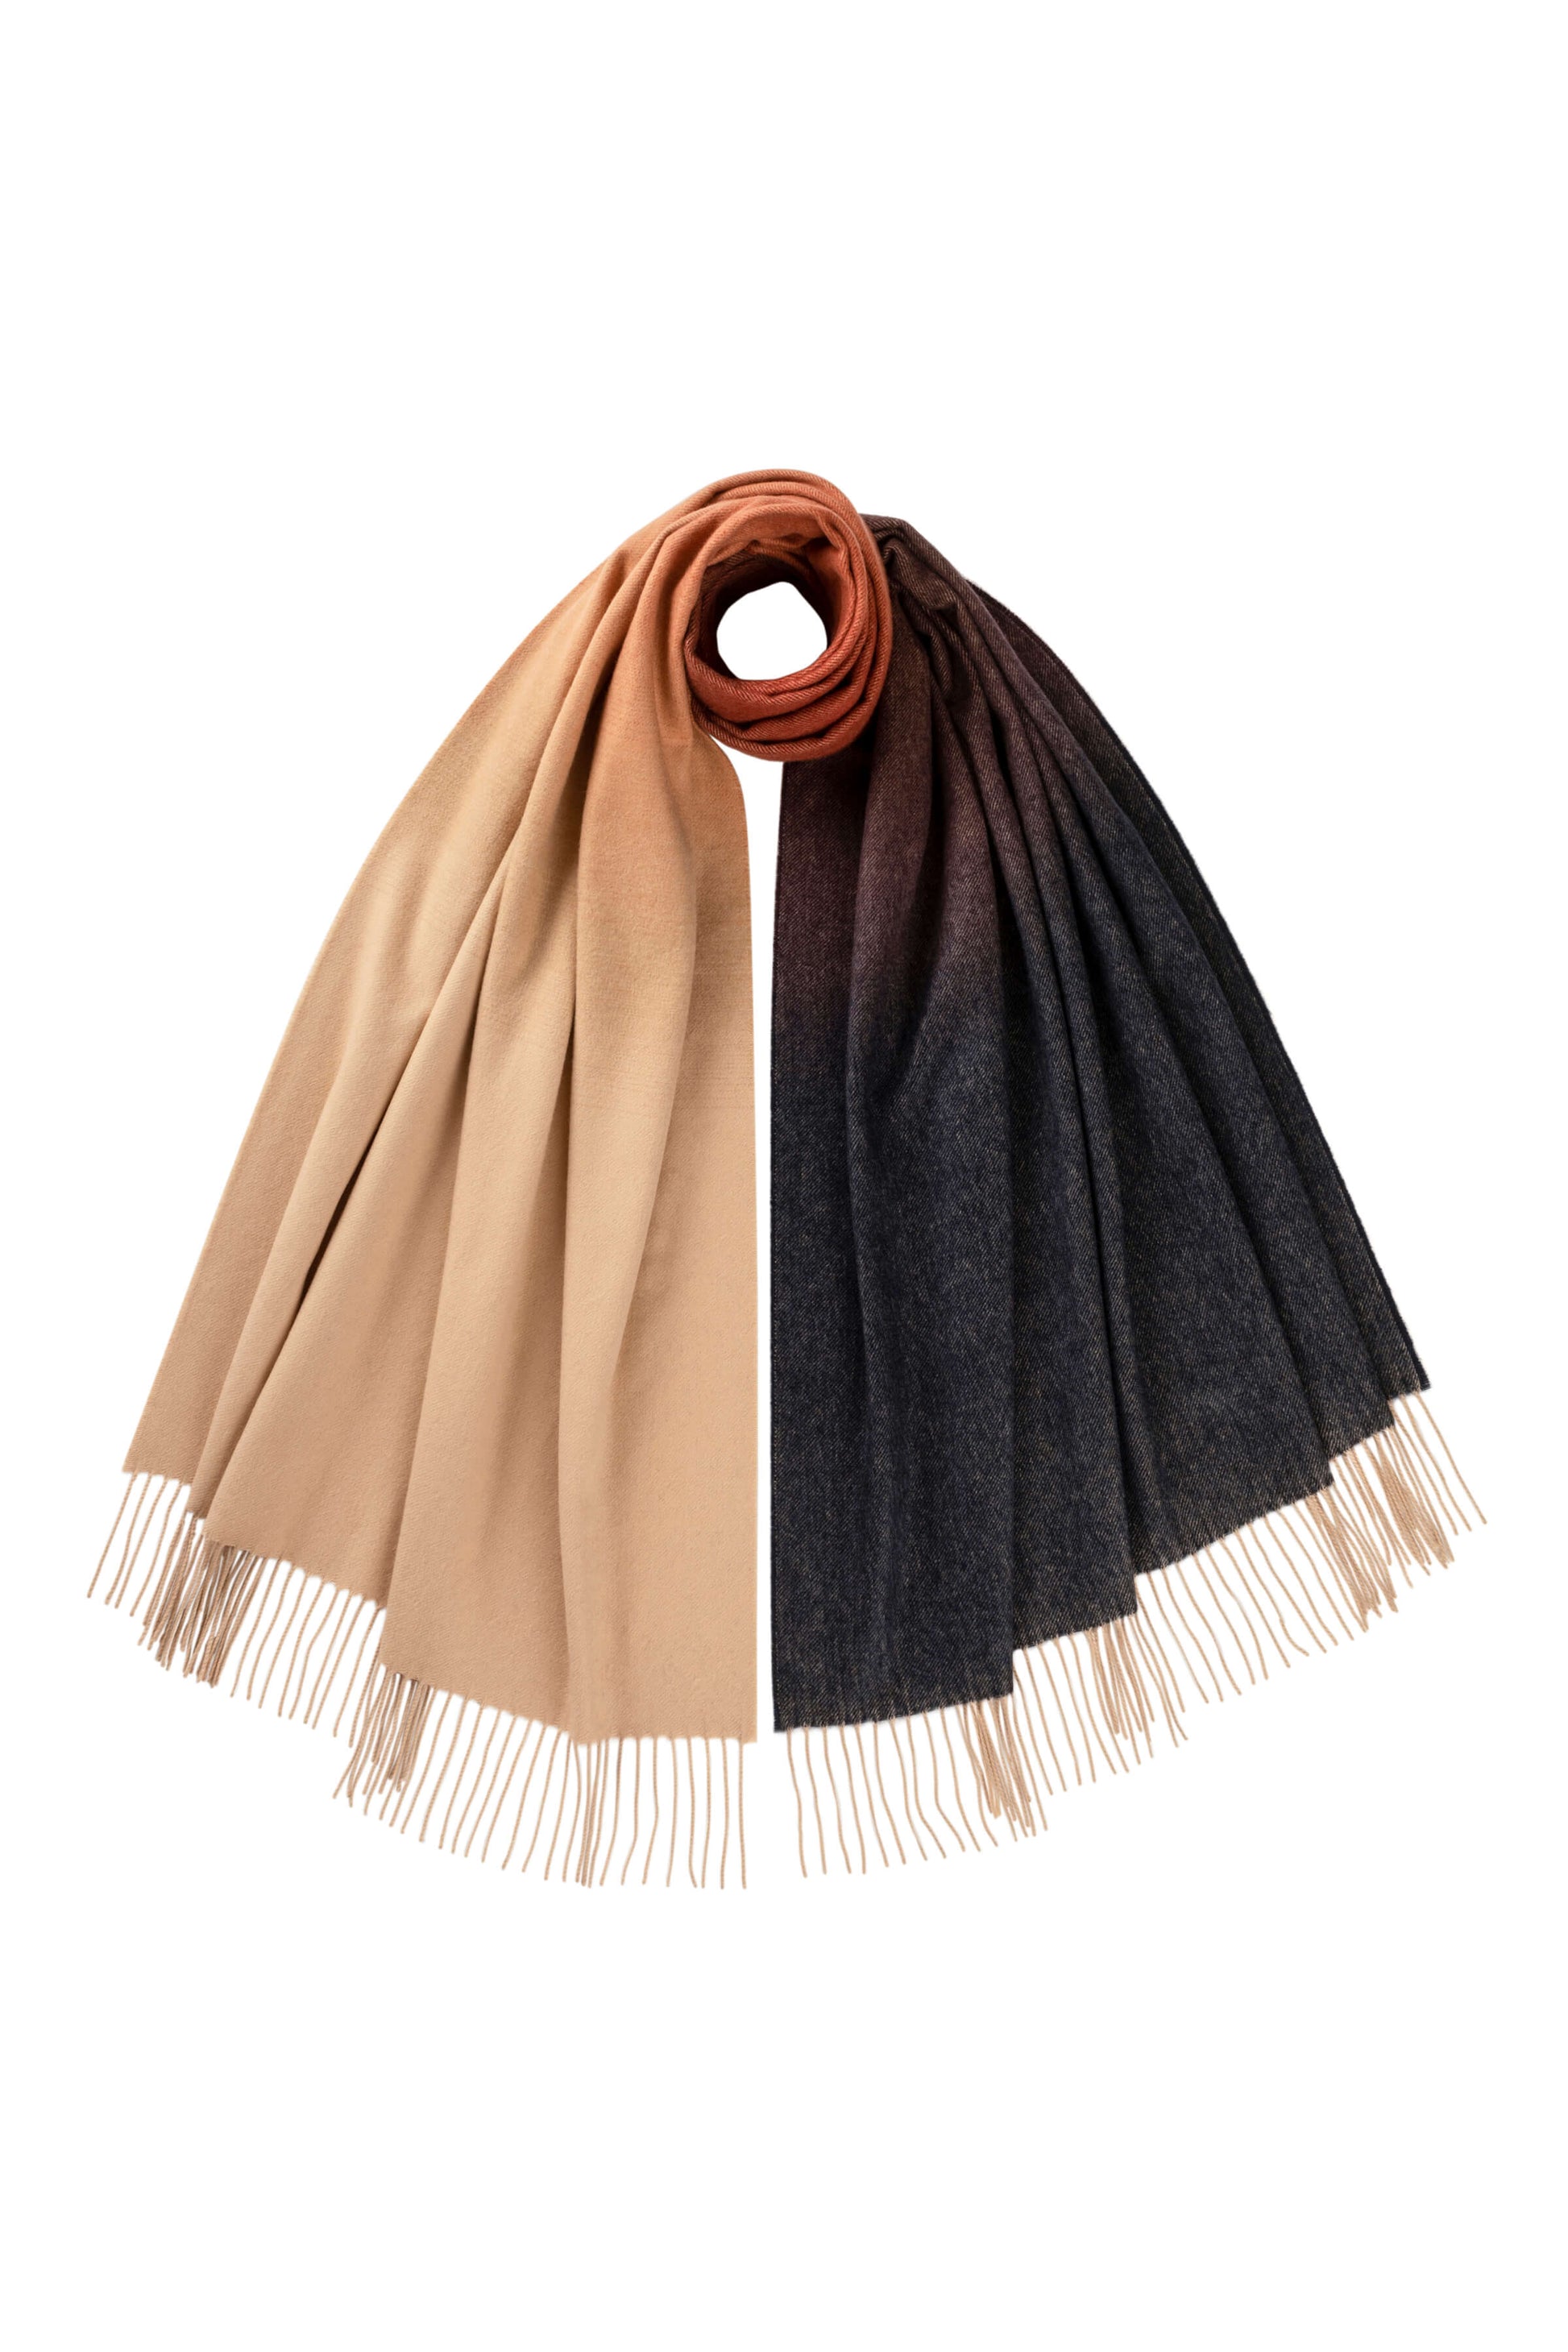 Johnstons of Elgin SS24 Accessories Navy & Camel Ombré Cashmere Stole WA000056RU7434ONE